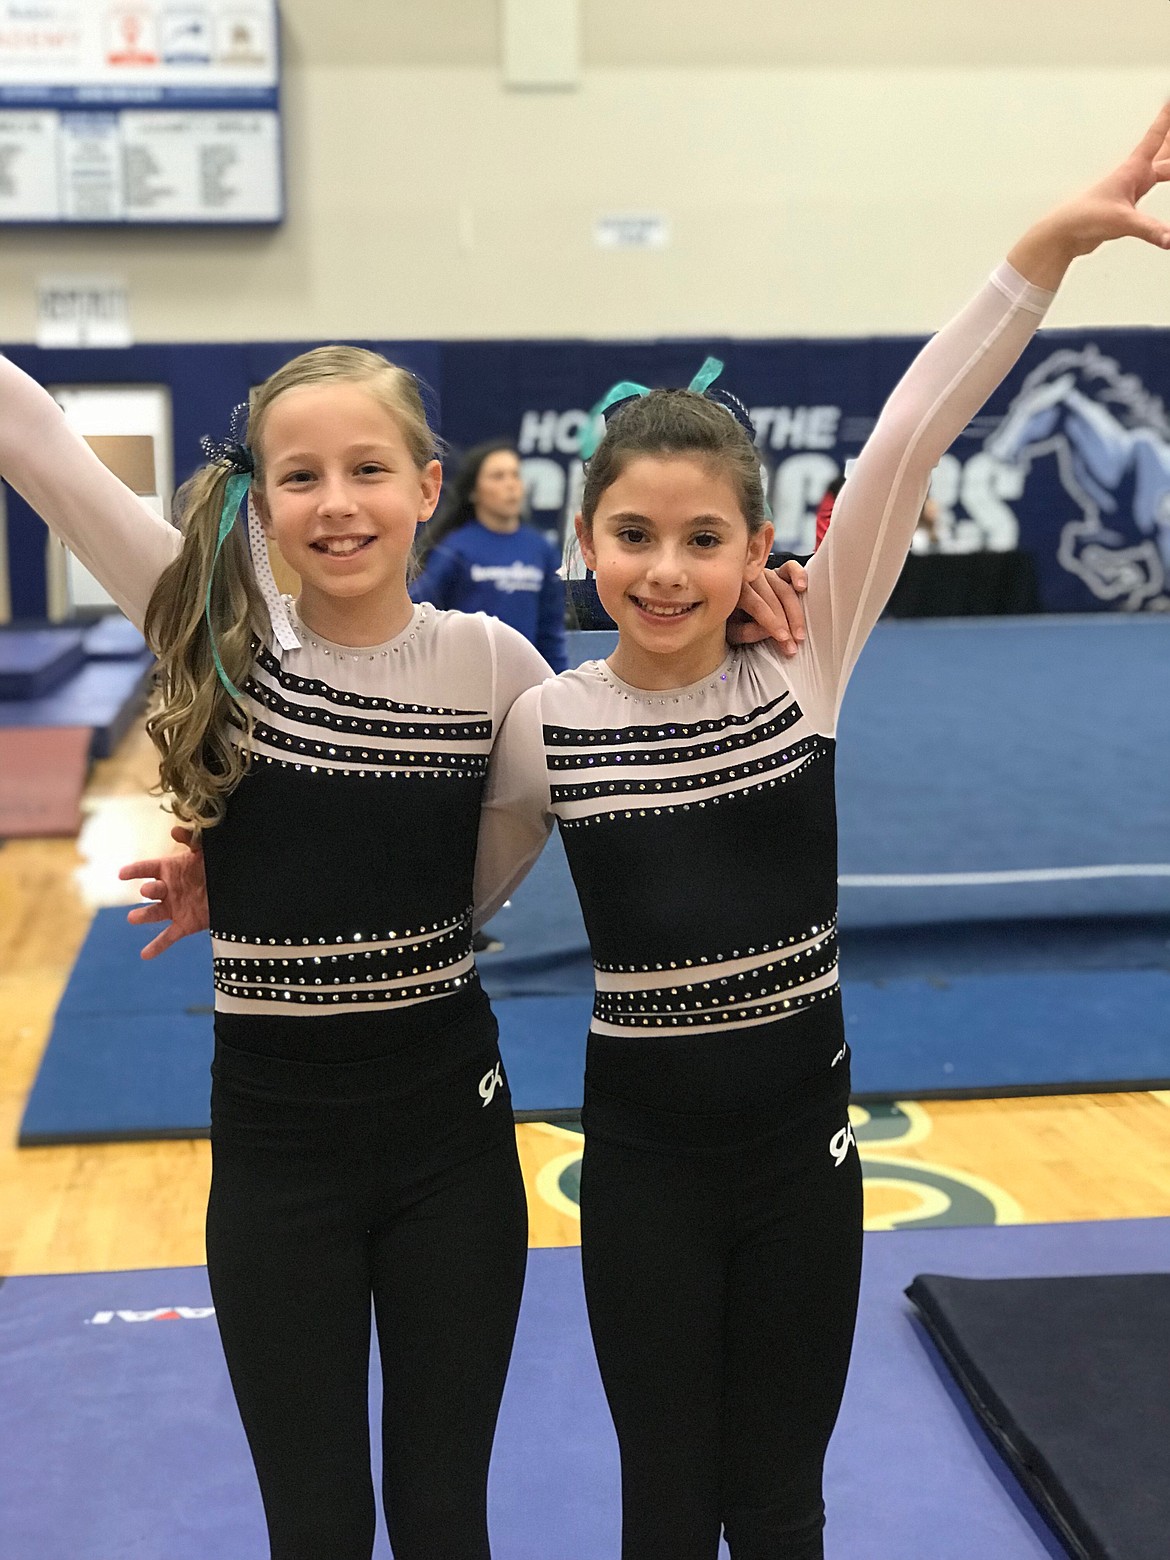 Courtesy photo
Avant Coeur Xcel gold gymnasts competing at the state meet in Boise included Alyssa Caywood, left, and Jasmine Quagliana.